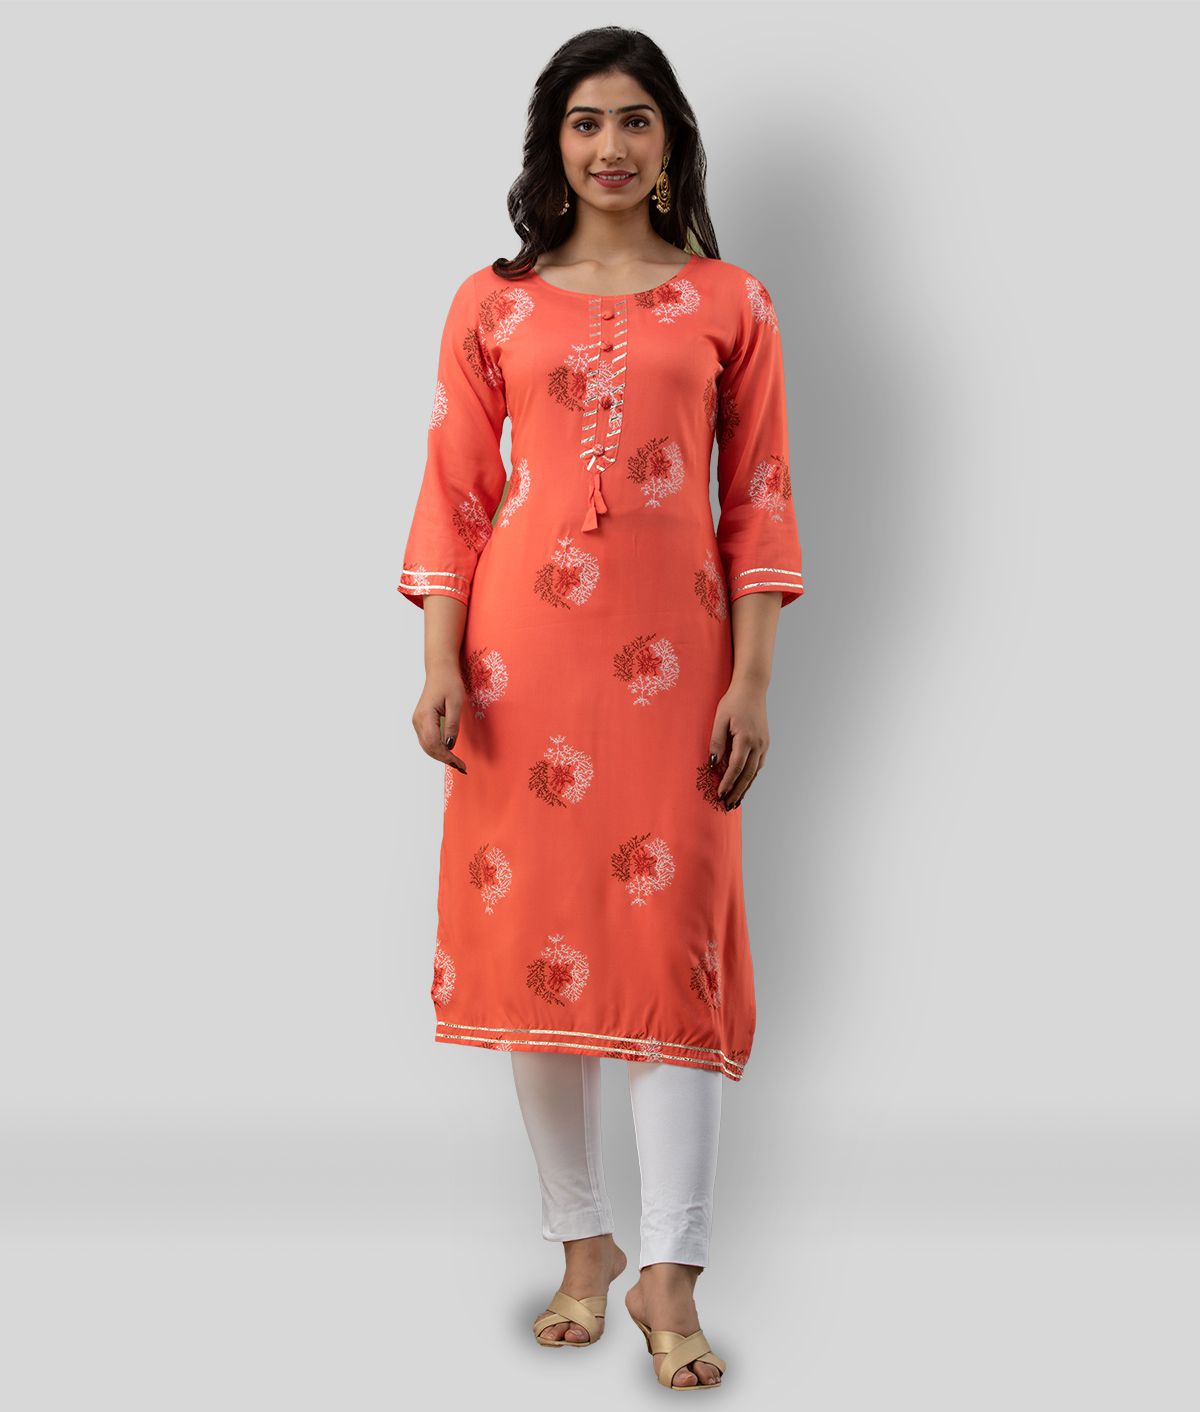 SVARCHI  Yellow Cotton Womens Straight Kurti  Pack of 1   Buy SVARCHI   Yellow Cotton Womens Straight Kurti  Pack of 1  Online at Best Prices  in India on Snapdeal